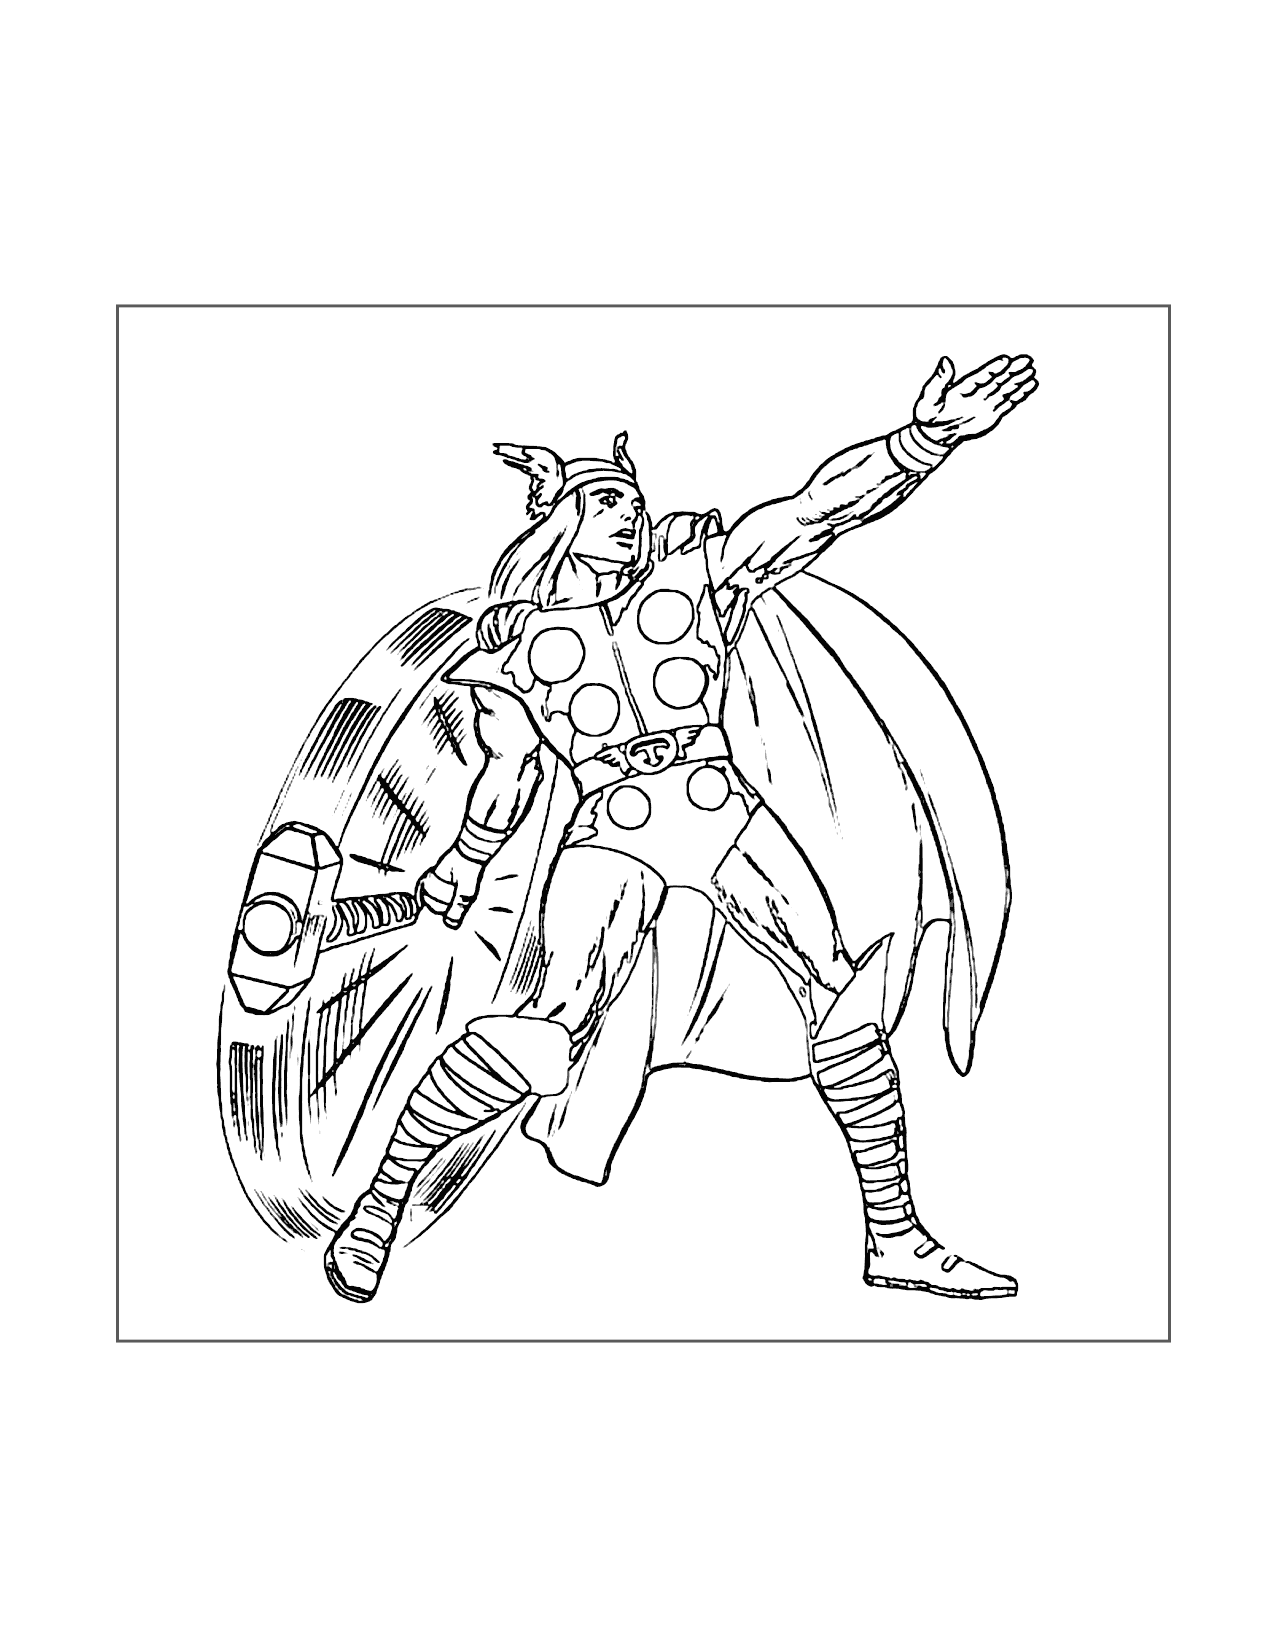 Comic Thor Coloring Page